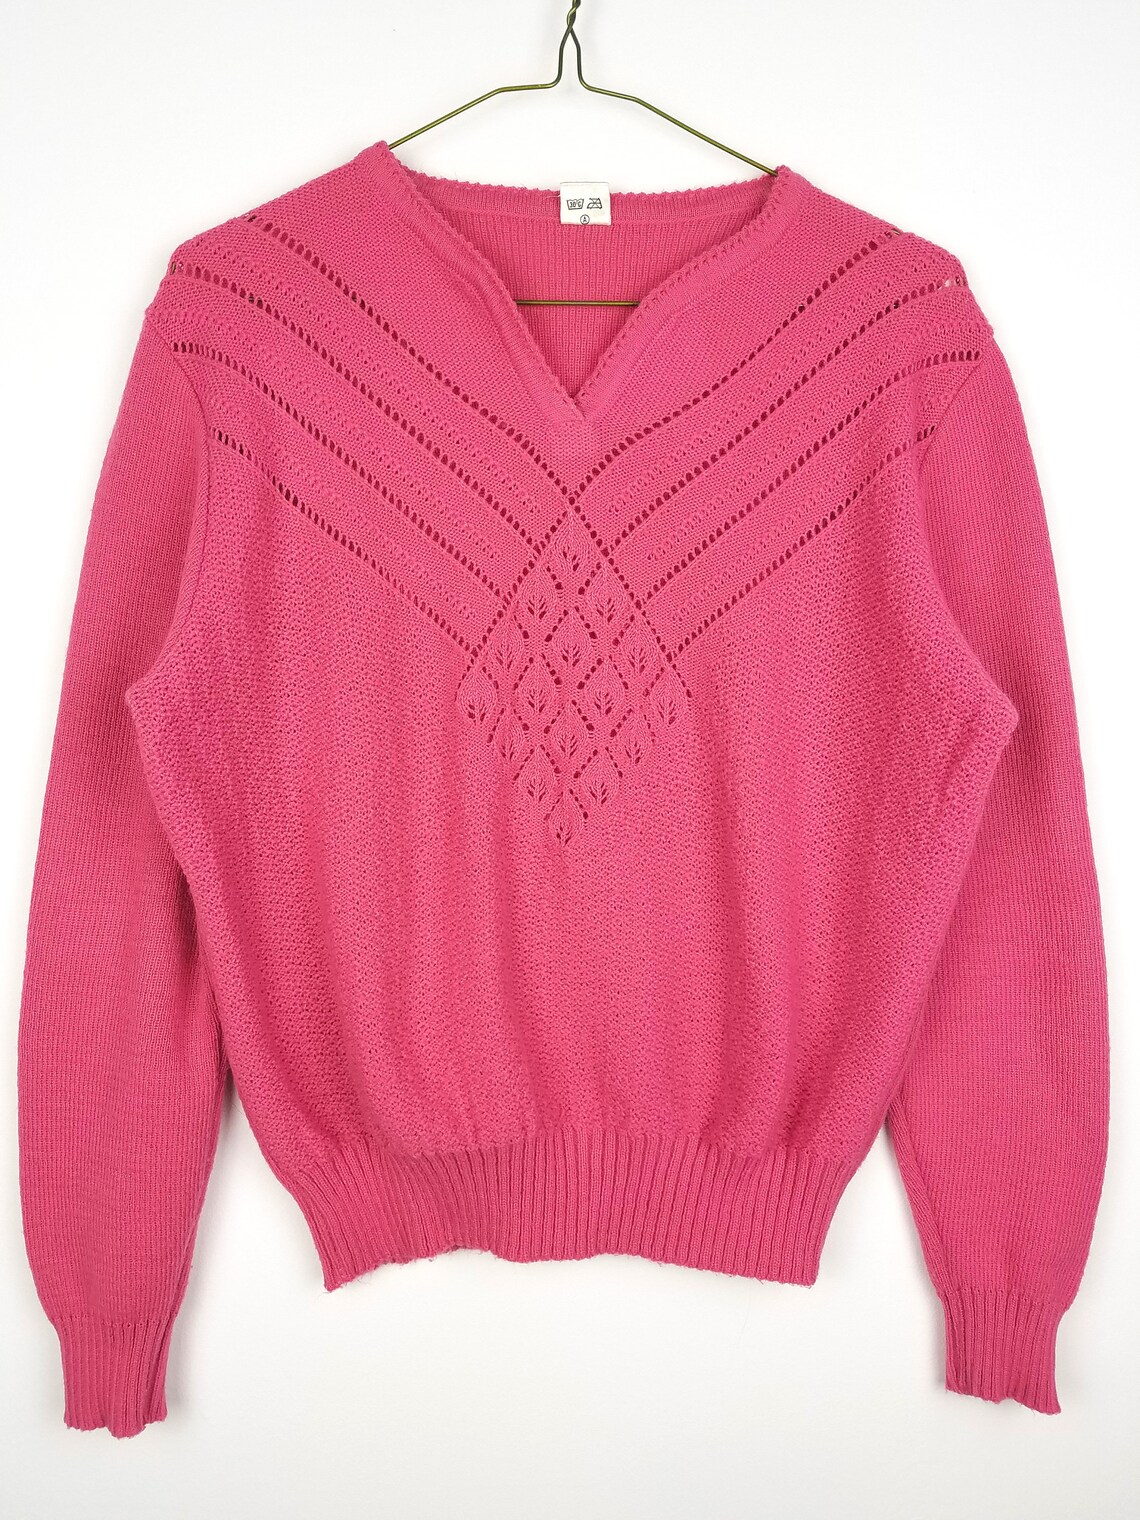 Raspberry Pink Knit Sweater Pre-1990s Vintage Size Small - Etsy